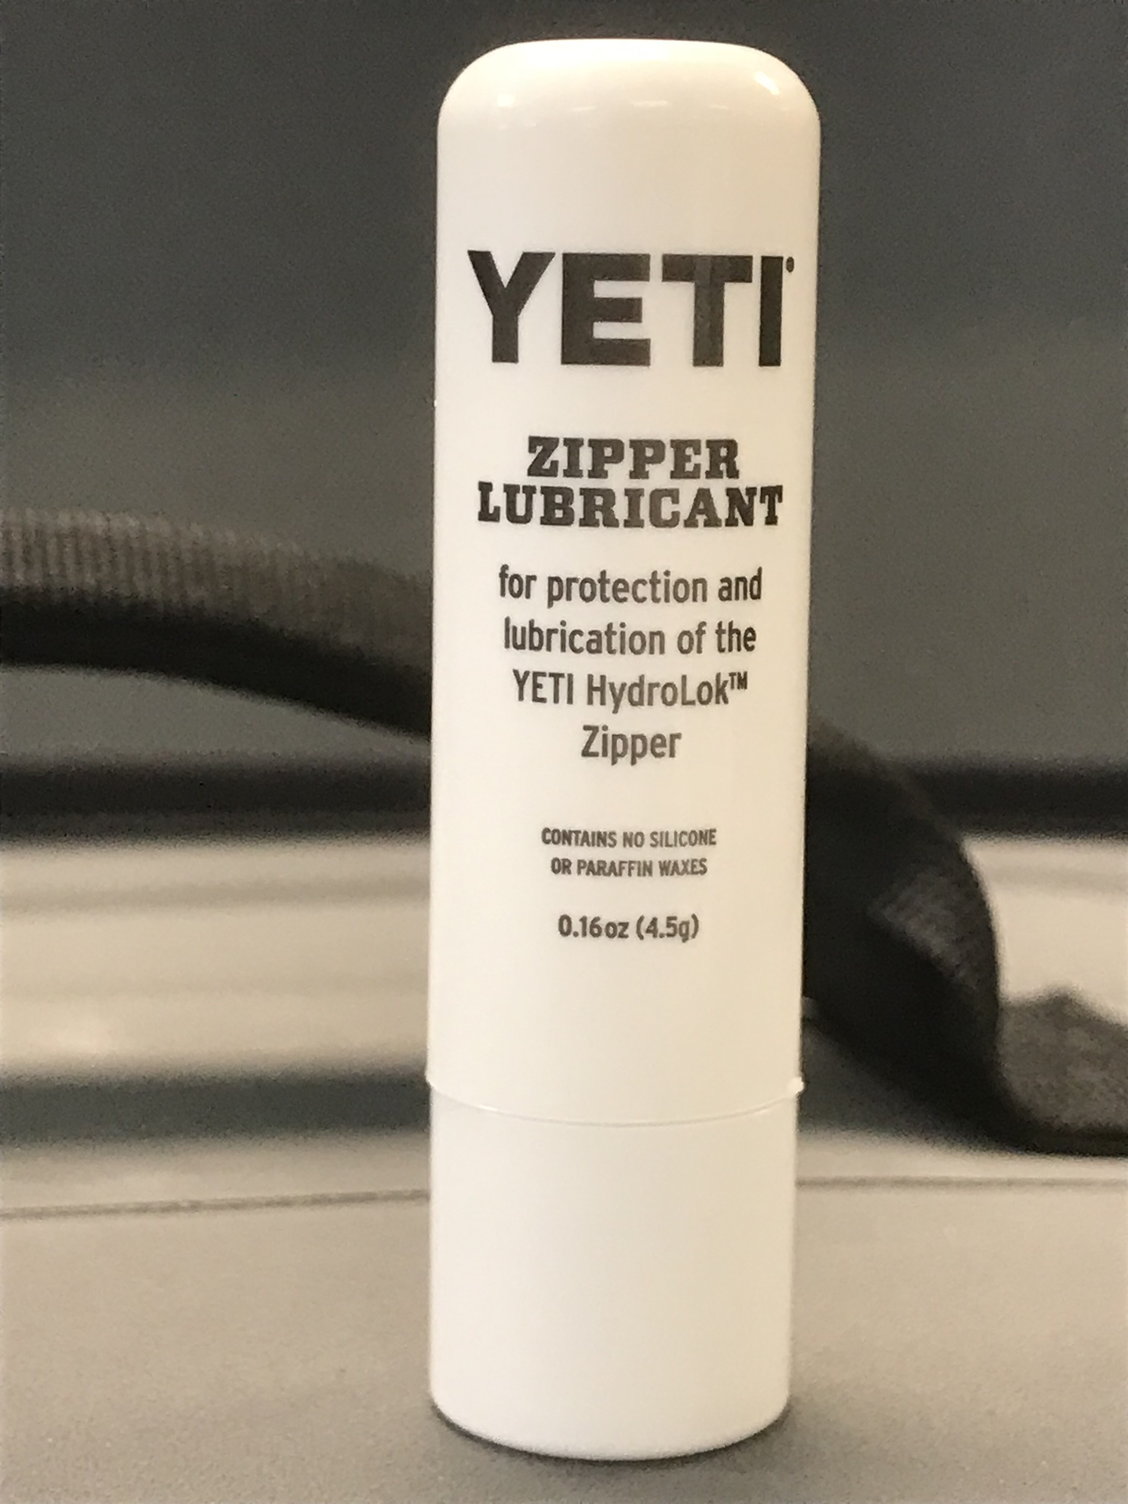 Yetiin the lube business now! - The 